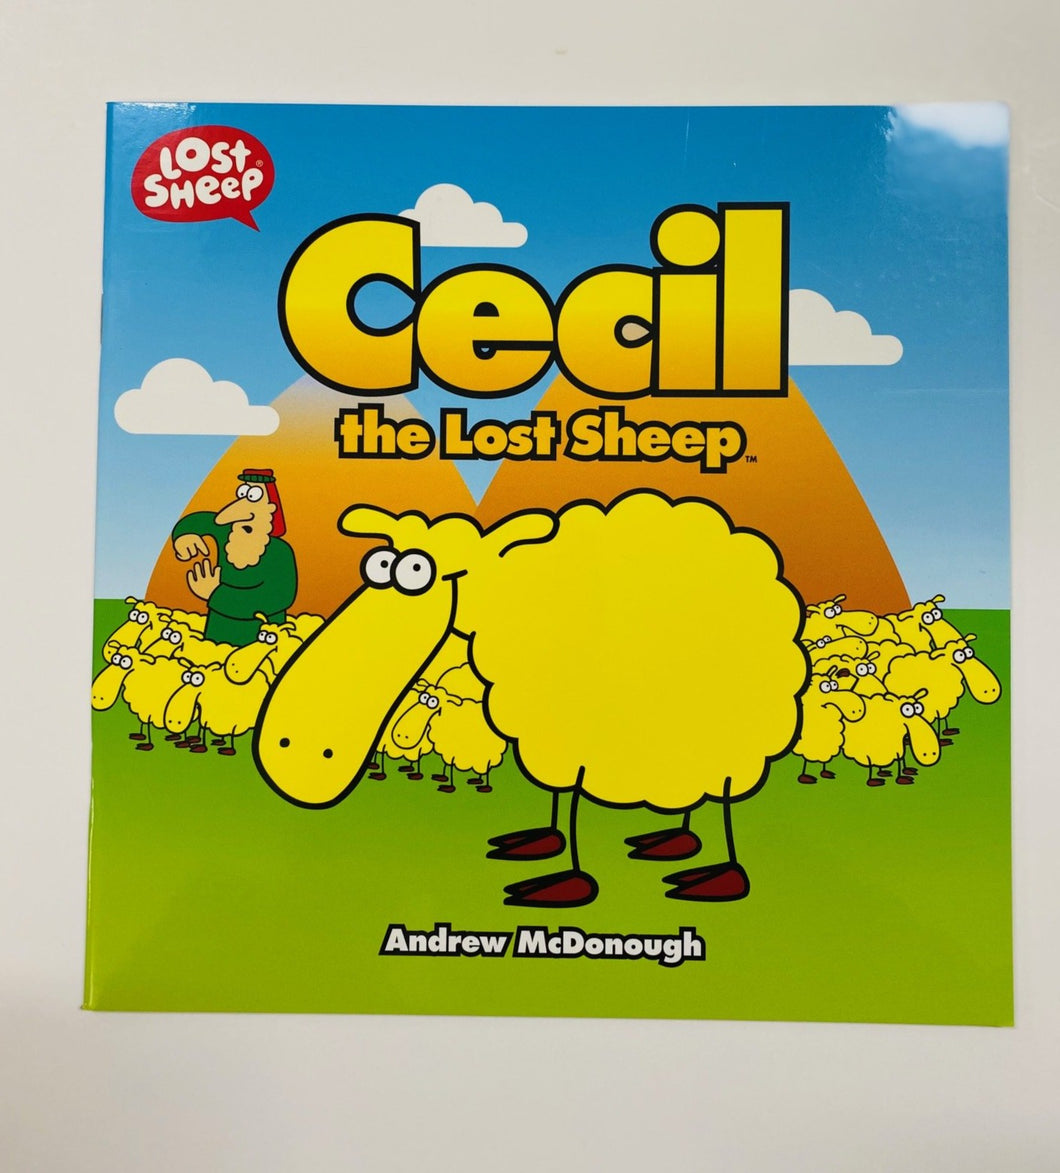 Lost Sheep: Cecil the Lost Sheep